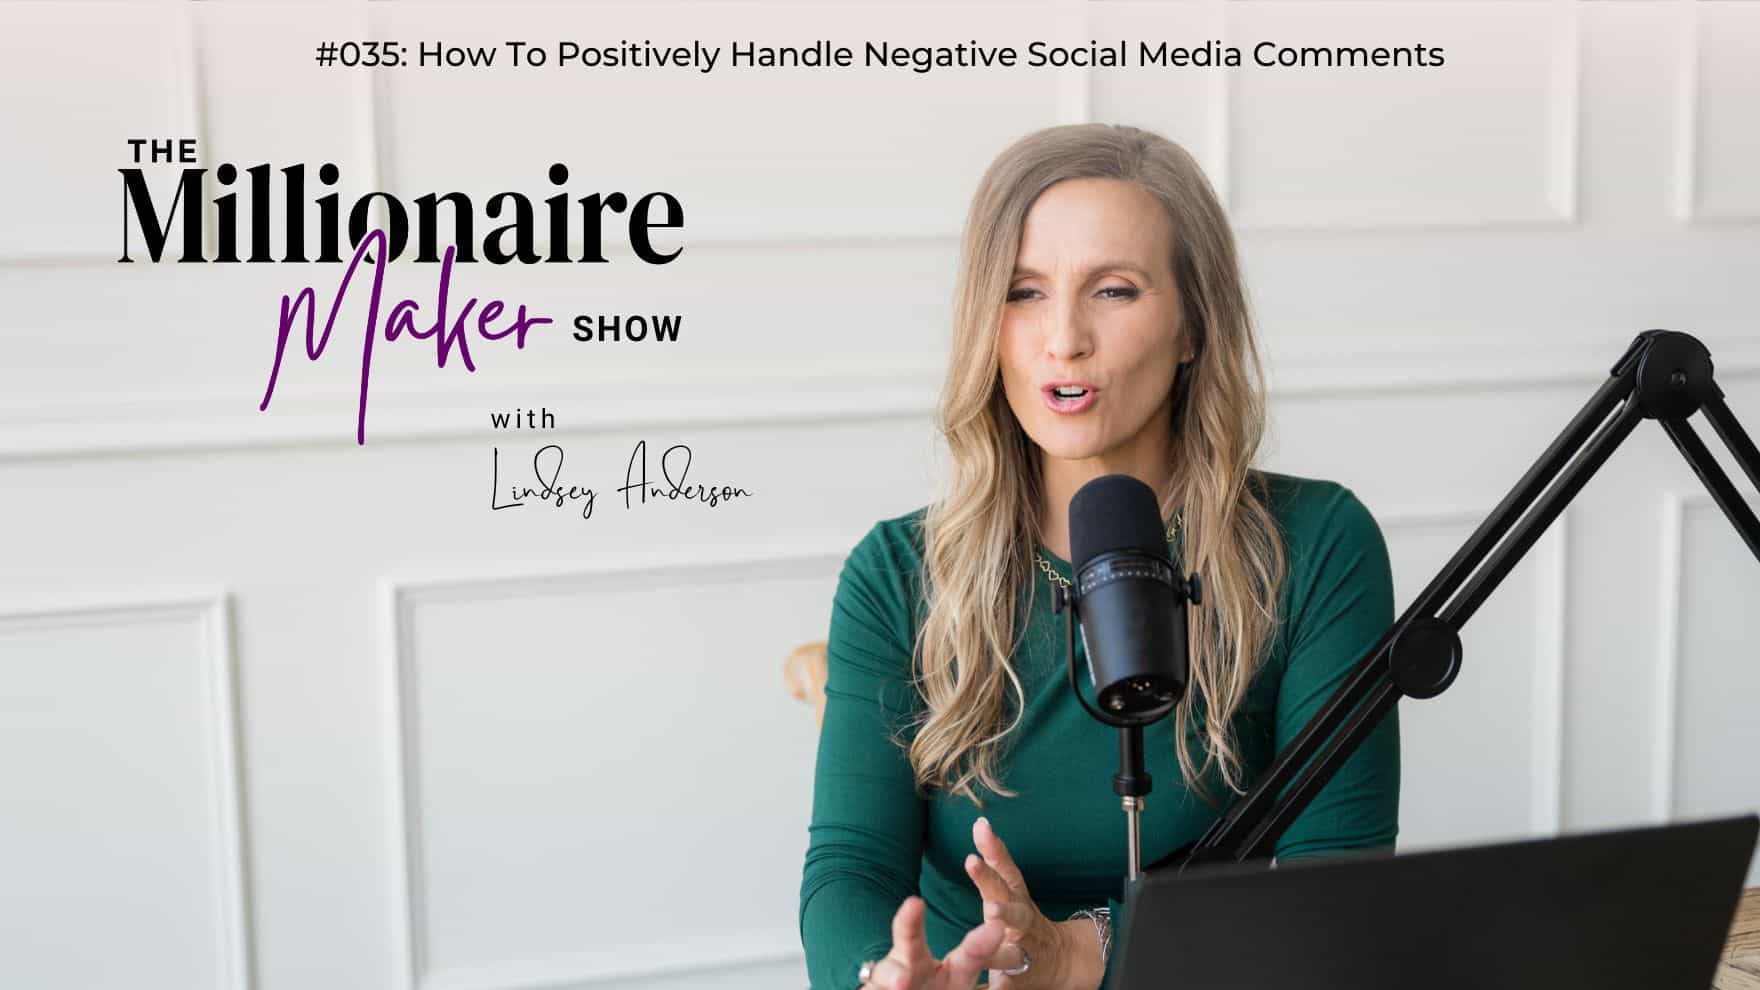 How To Positively Handle Negative Social Media Comments